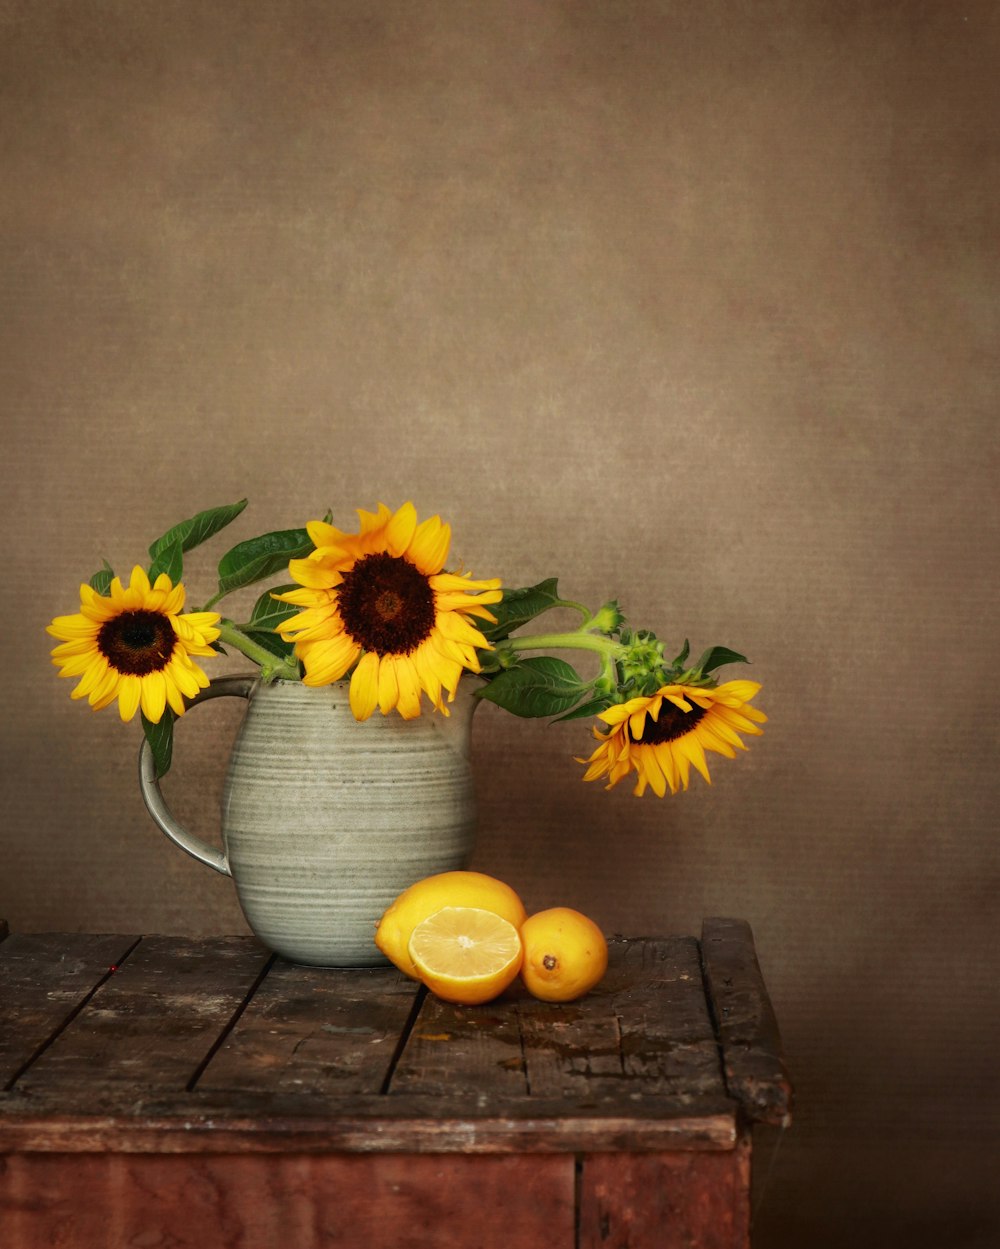 yellow and white flower in blue ceramic vase